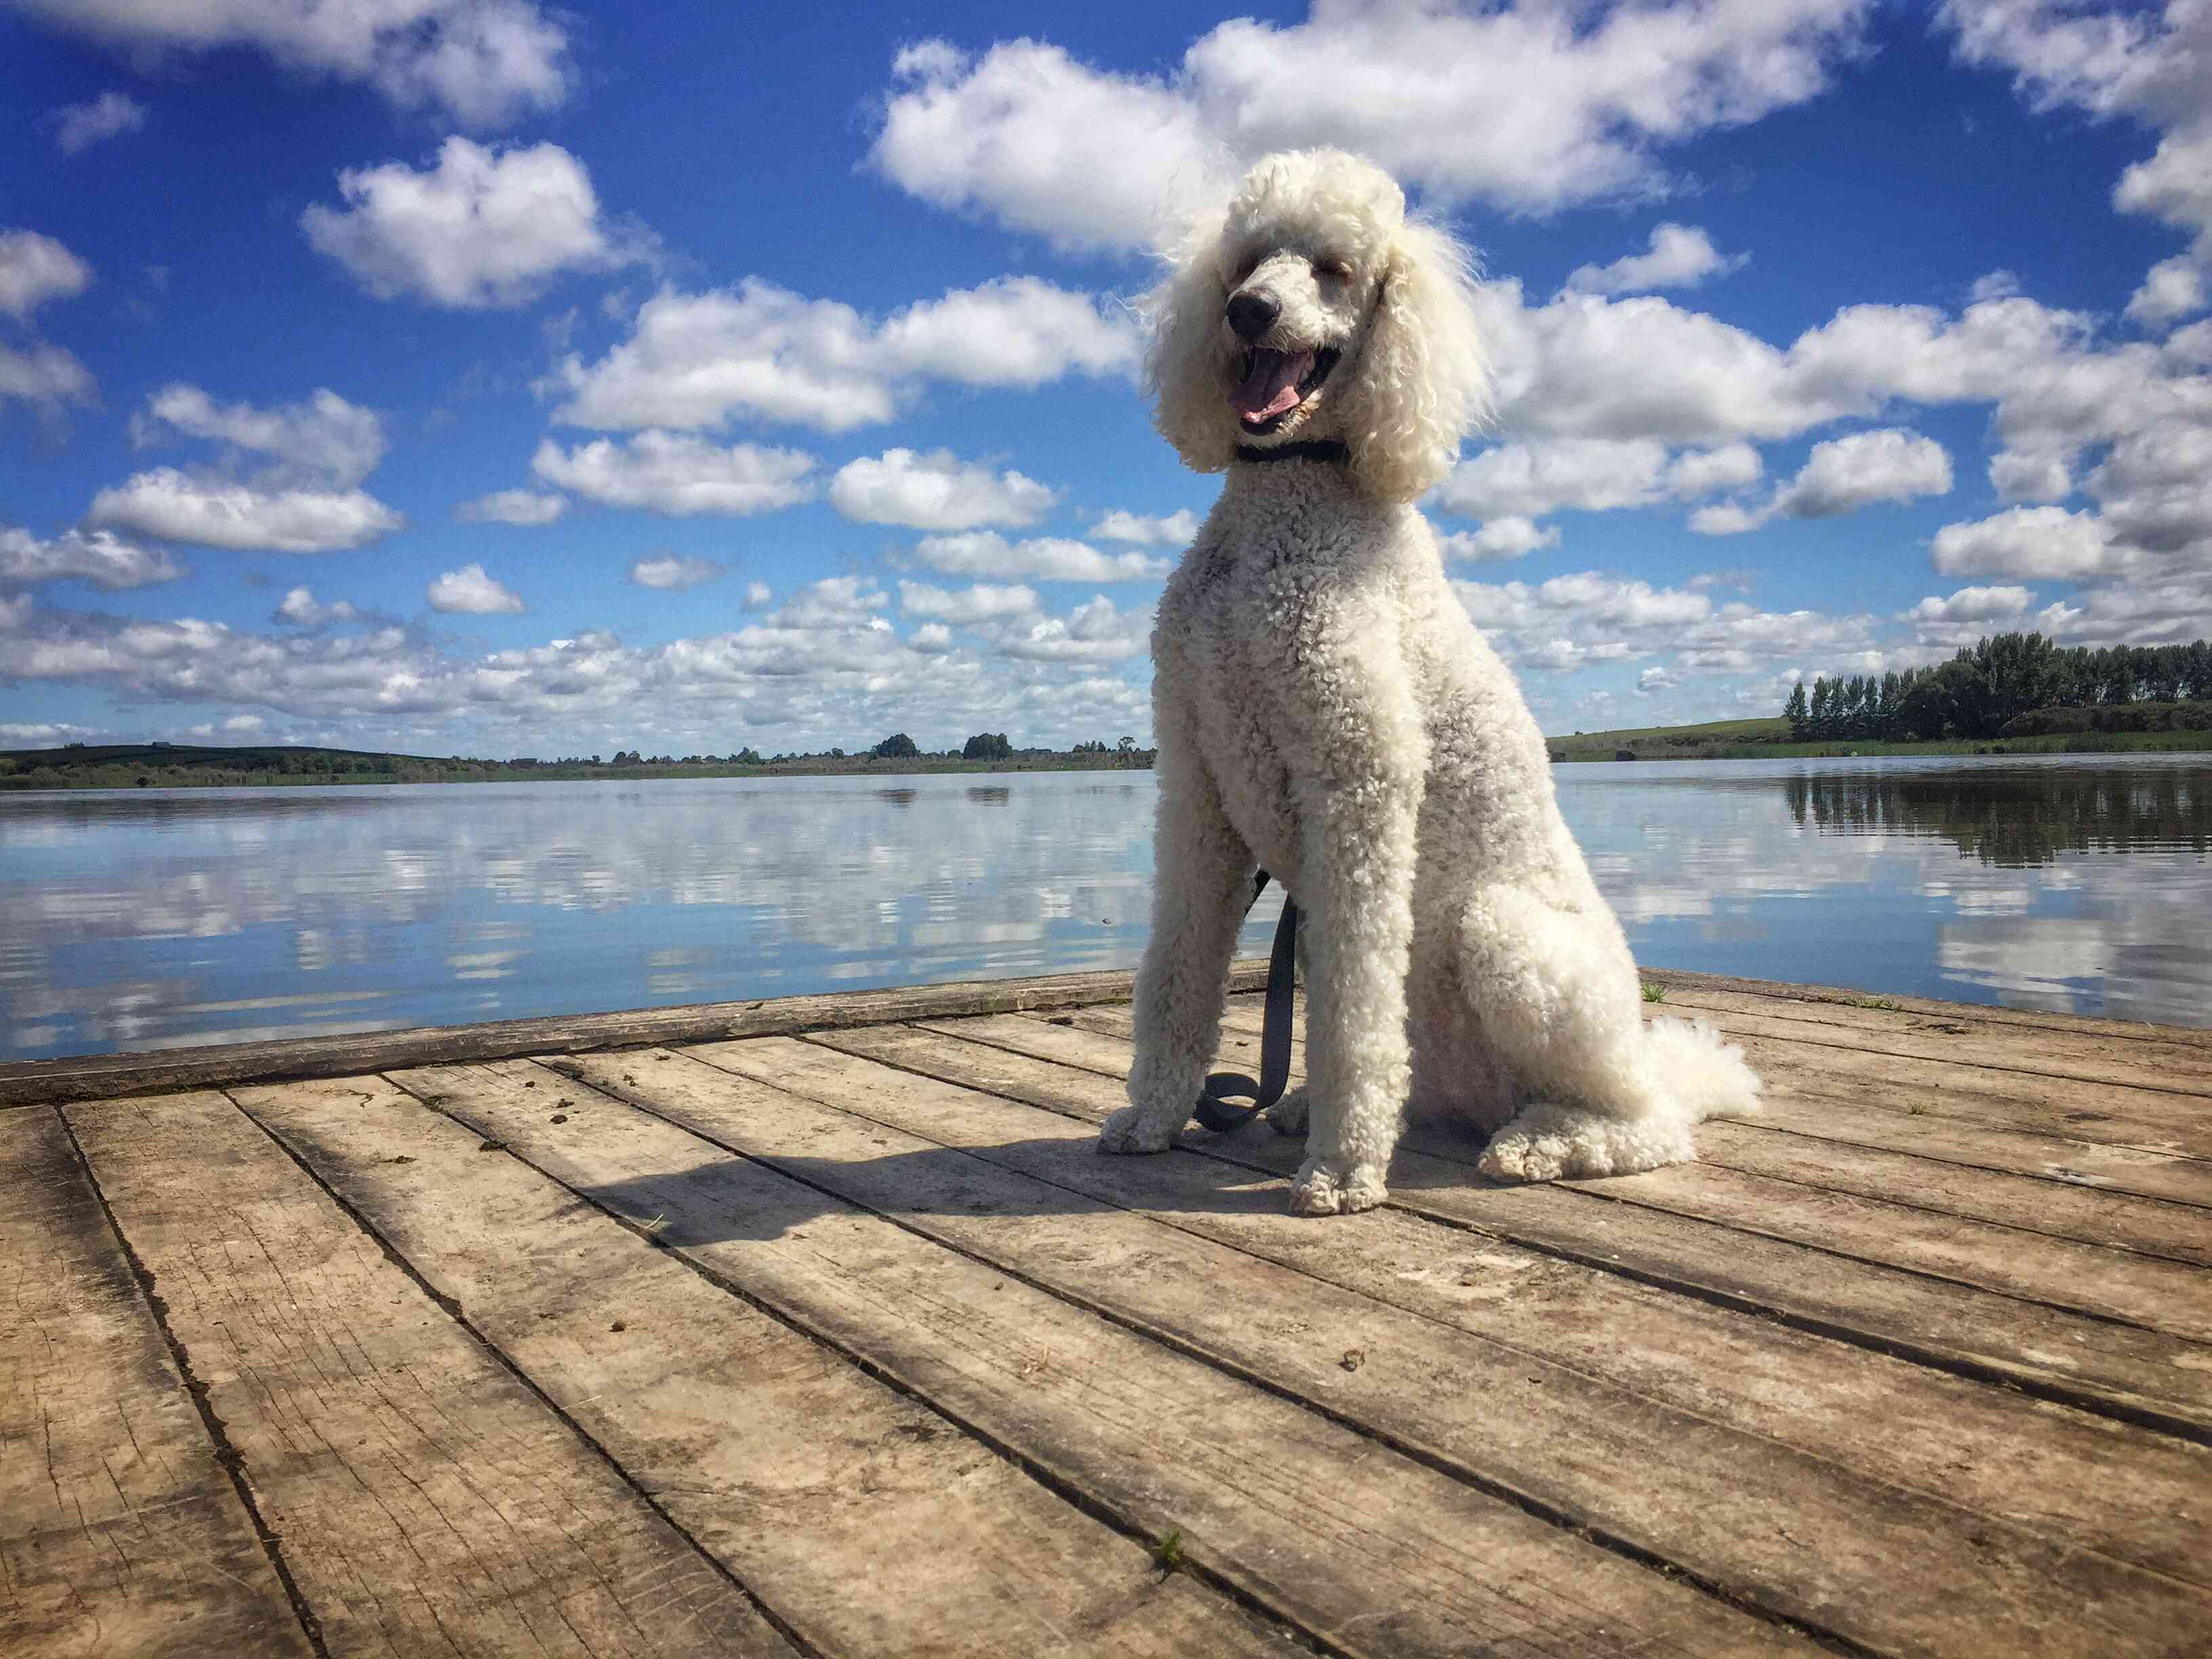 A Poodle sitting on a dock.